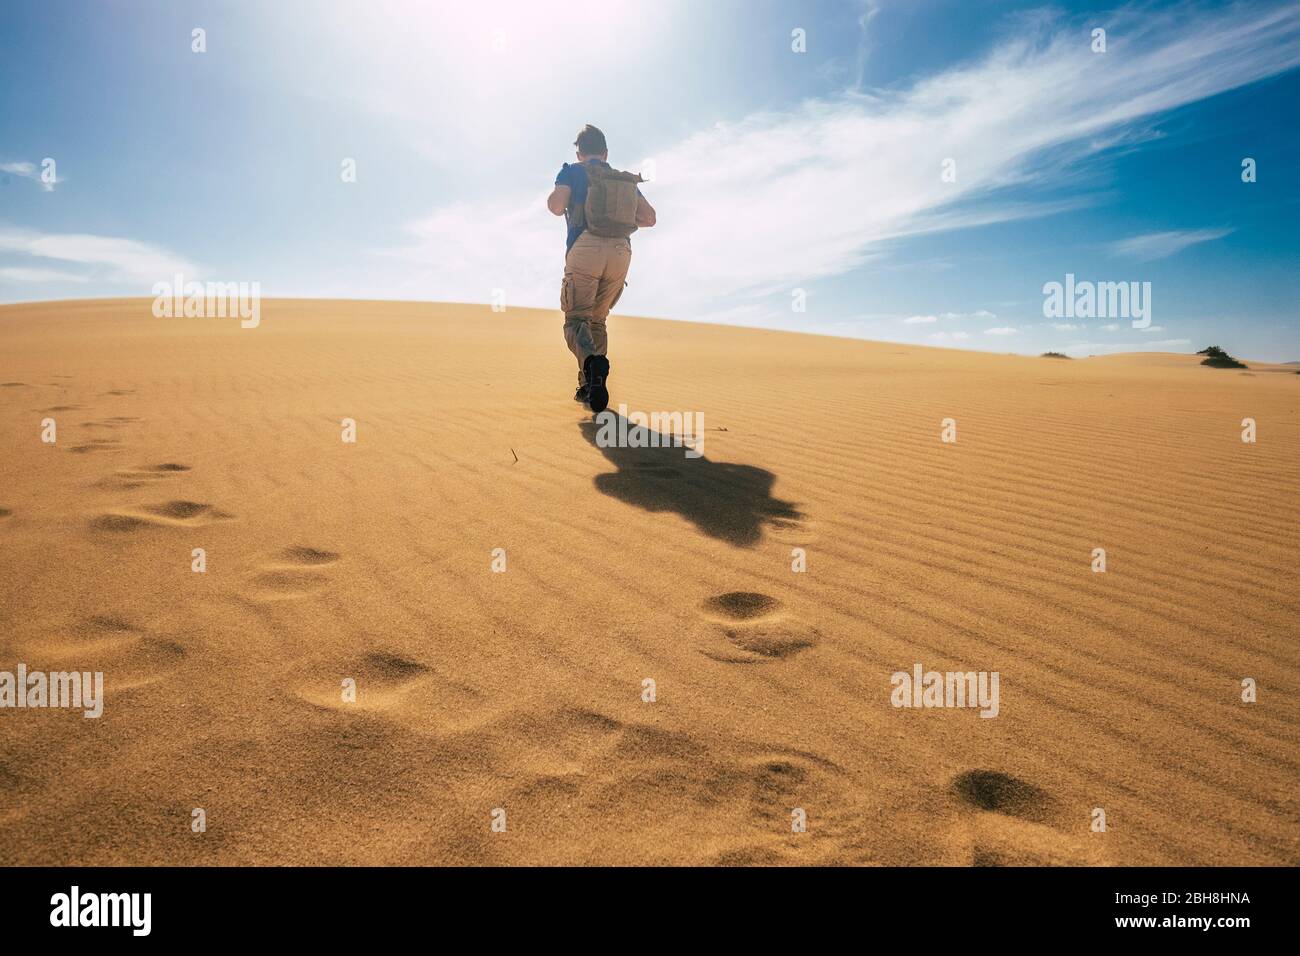 Backpacker people explore and adventure leisure activity concept with man walking on the desert dunes with backpack - alternative vacation for freedom lifestyle - scenic nature outdoor Stock Photo